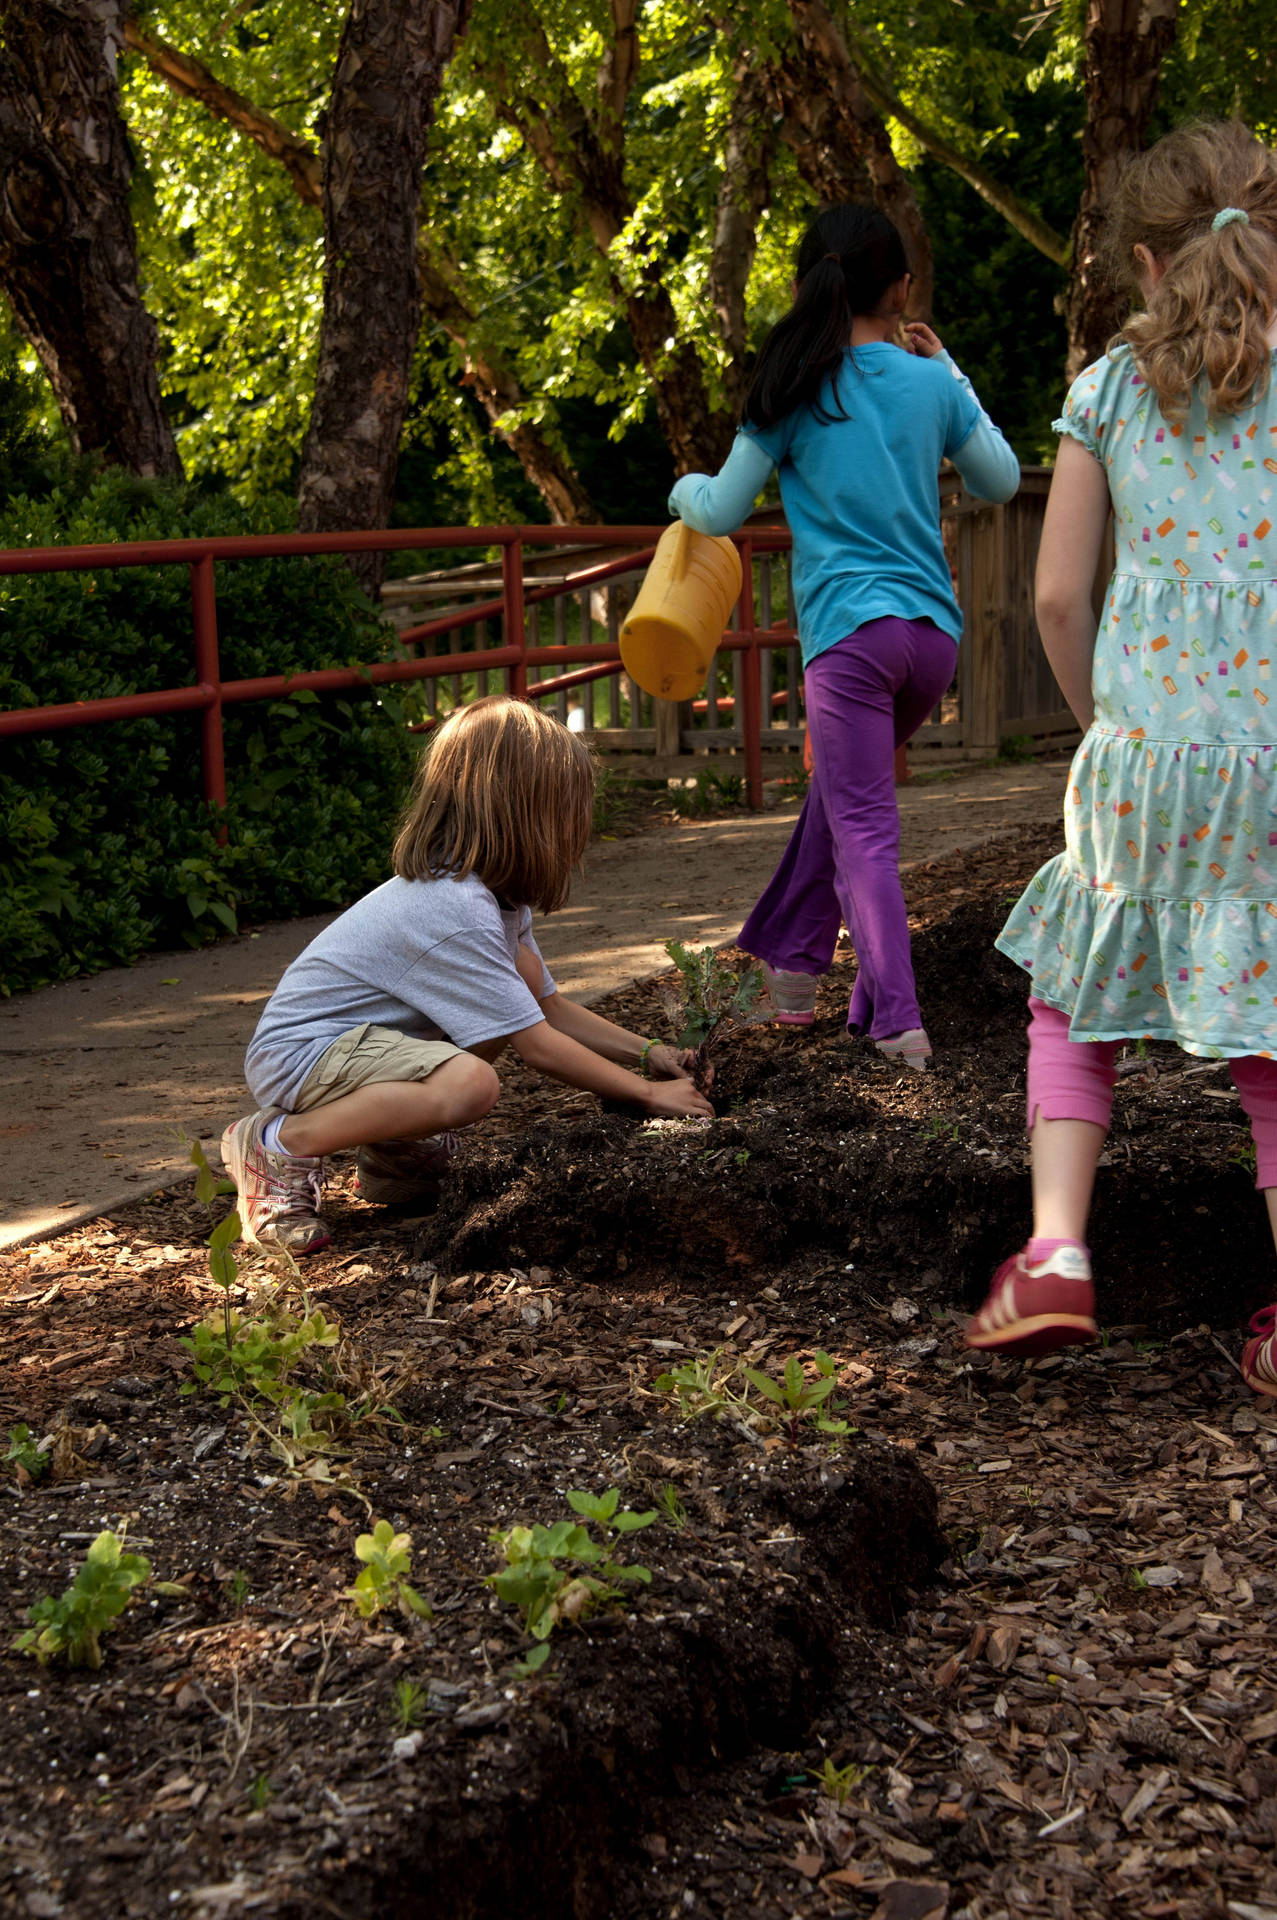 Young Kids Enthusiastically Participating In A Gardening Activity. Background